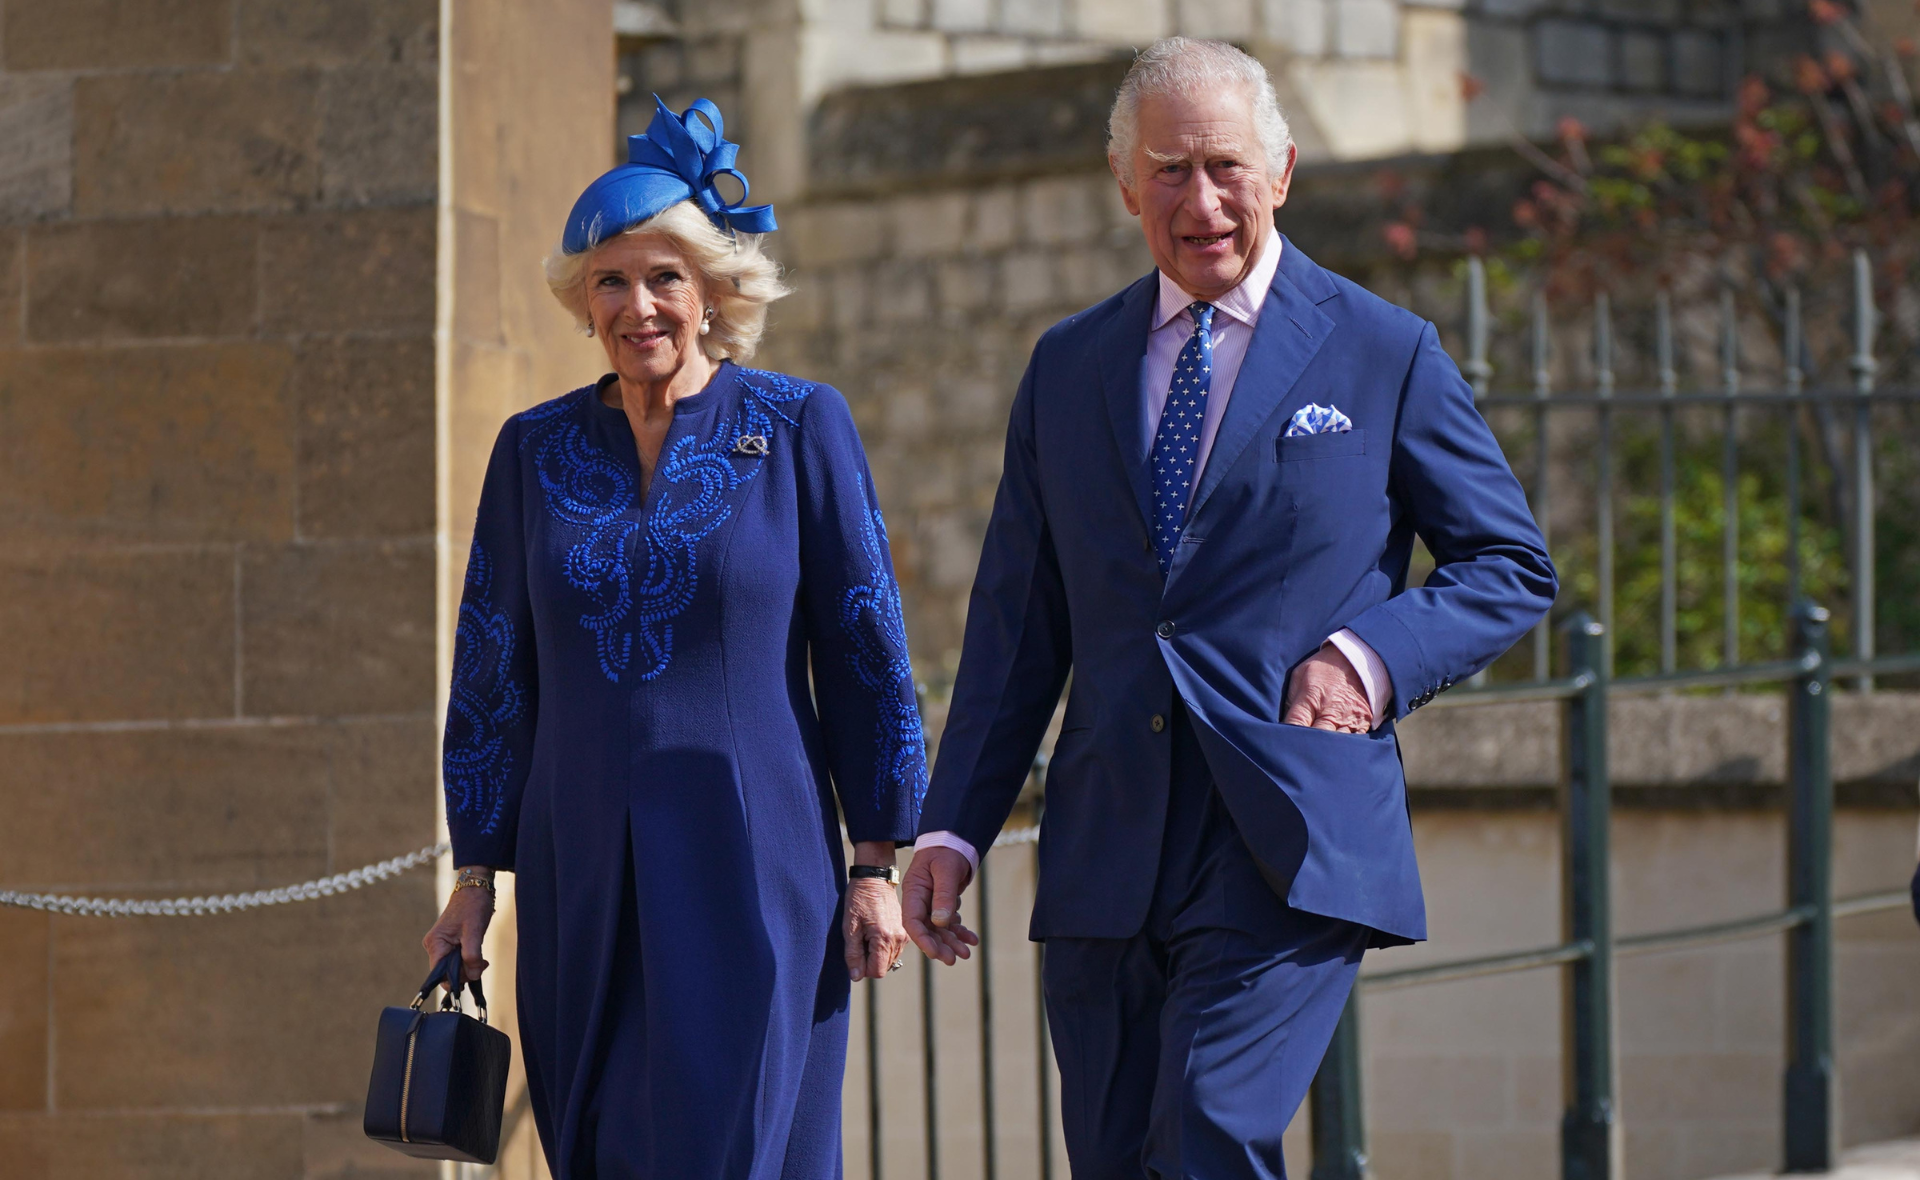 King Charles has been confirmed to attend royal Easter Sunday service